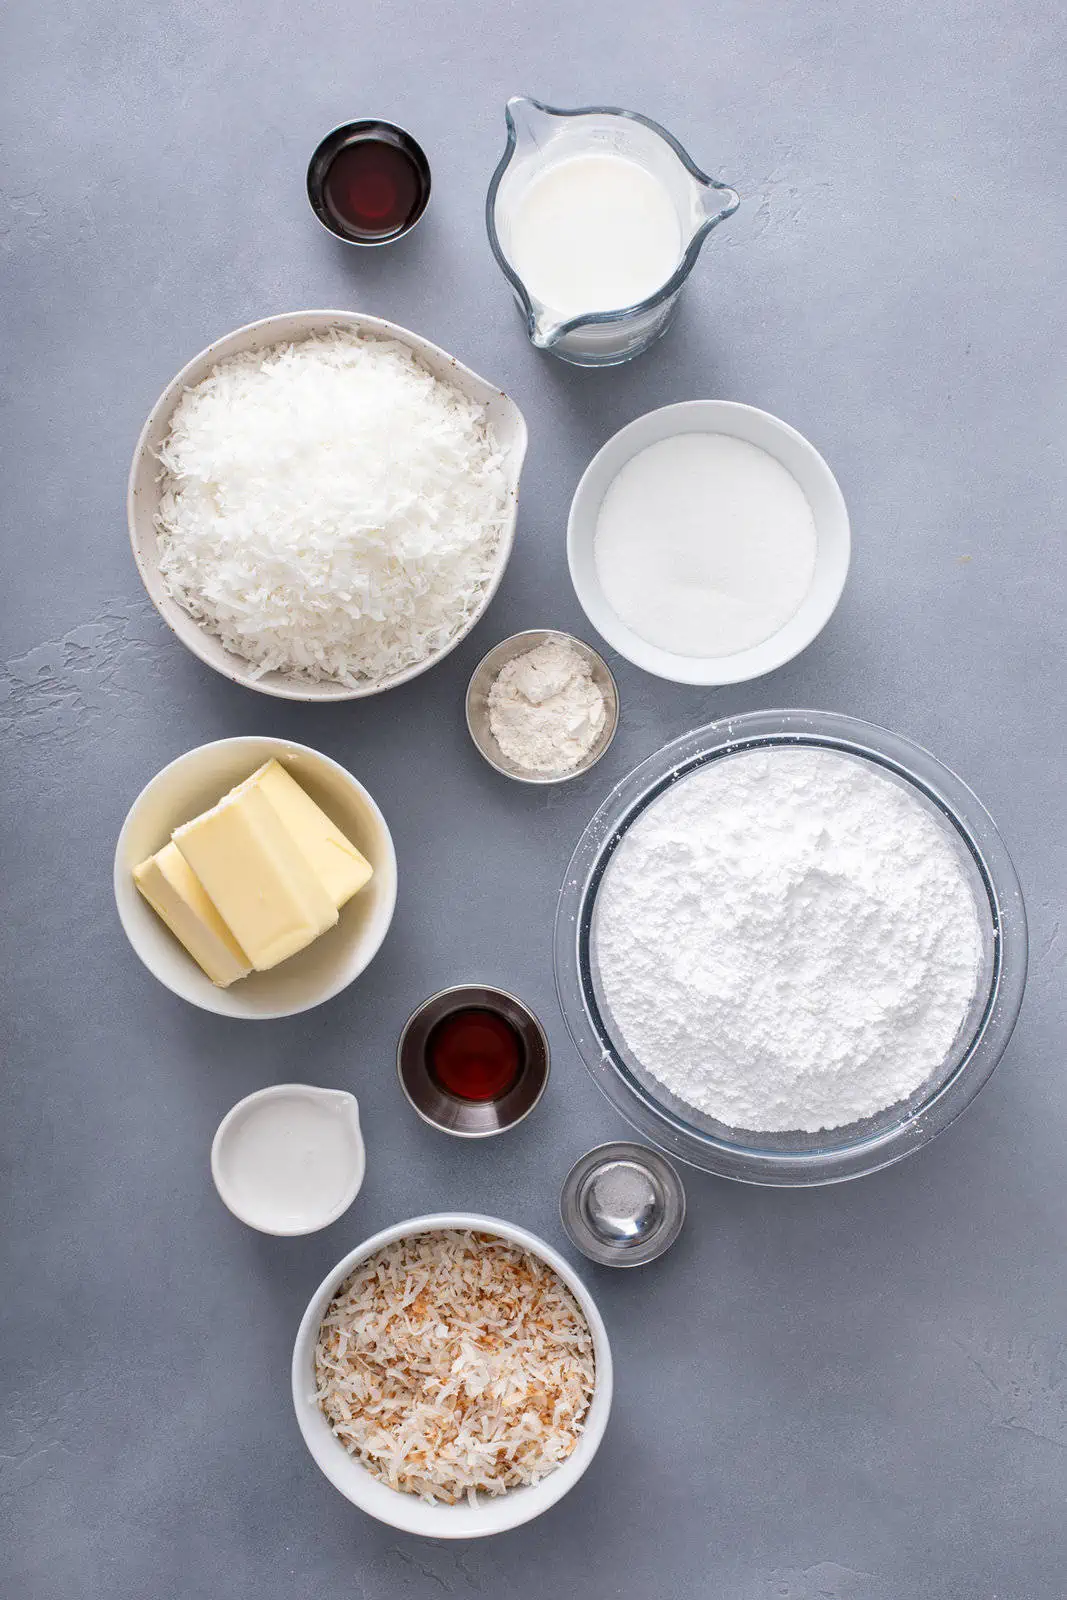 Ingredients for coconut filling and coconut frosting arranged on a gray countertop.